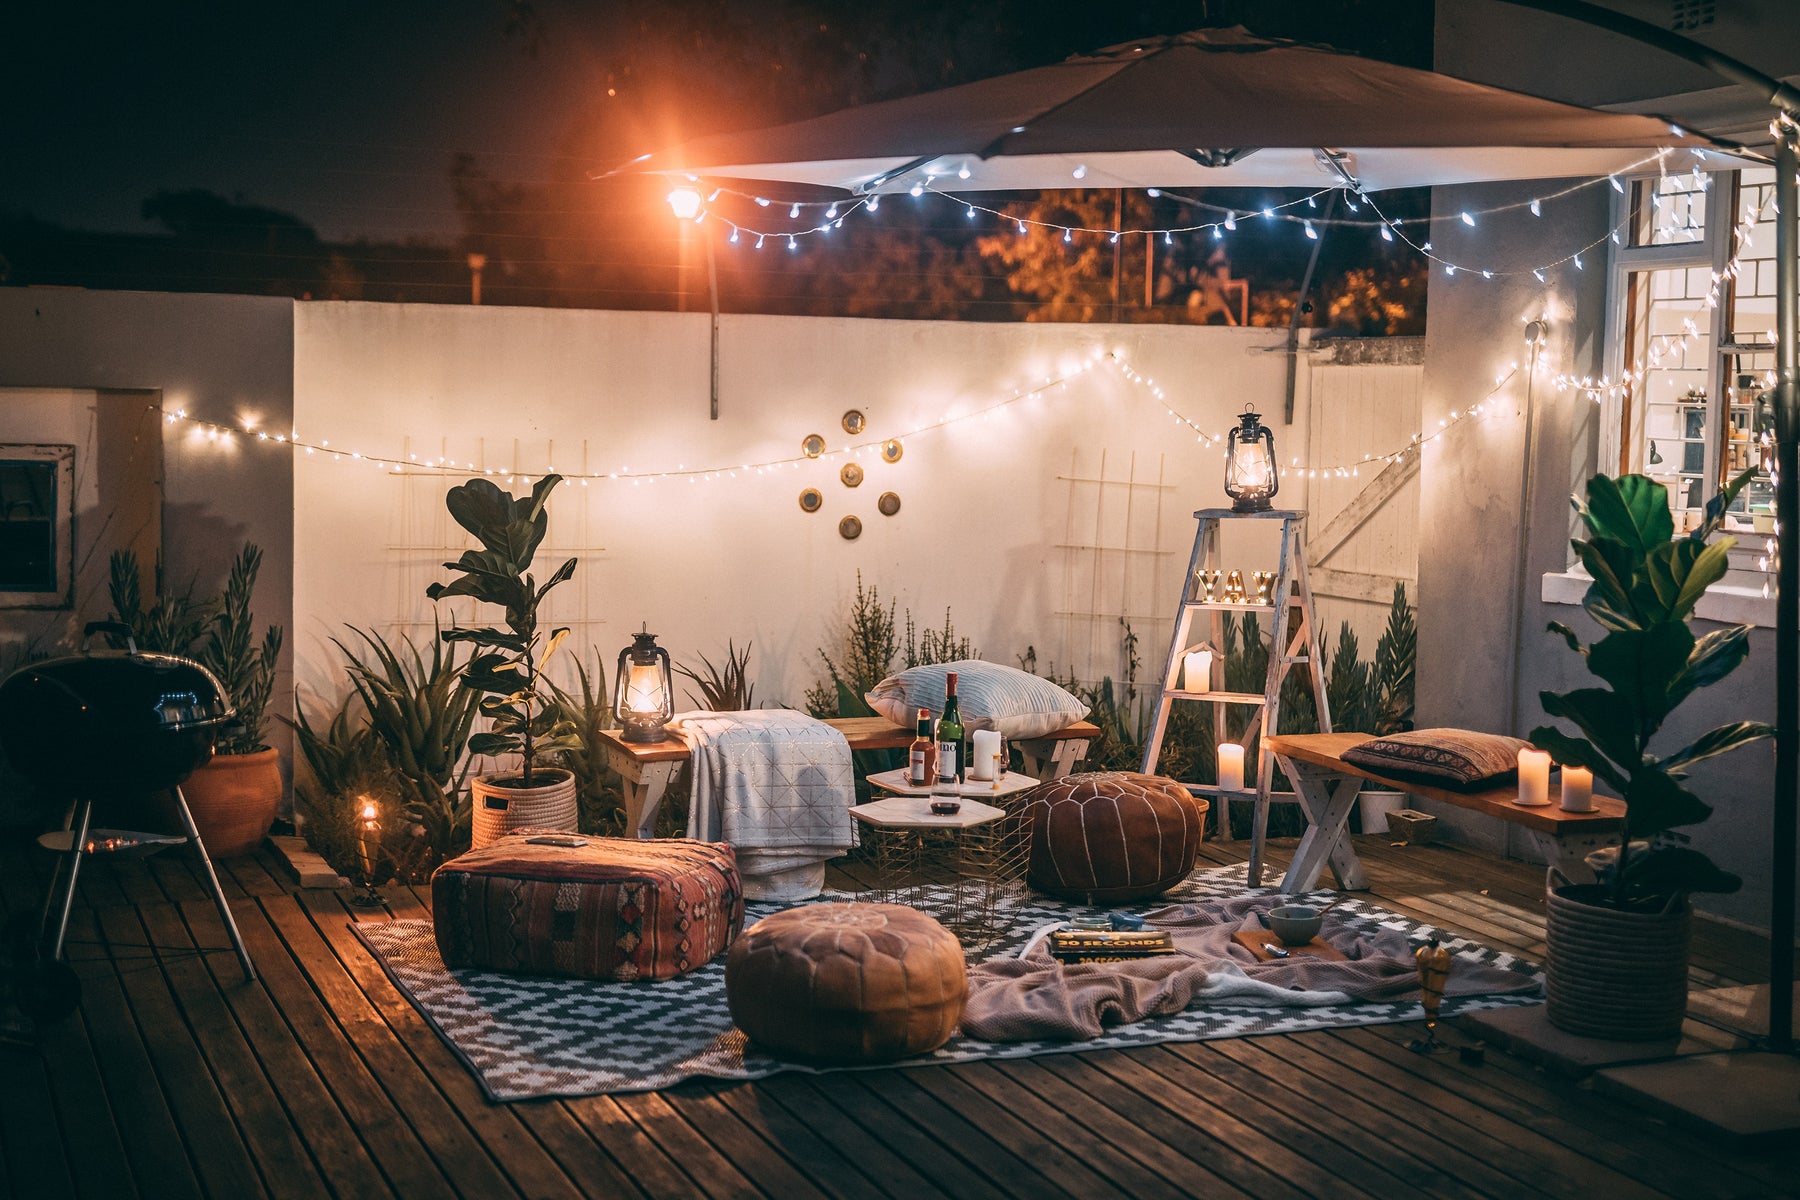 How to Decorate Your Dream Outdoor Sanctuary